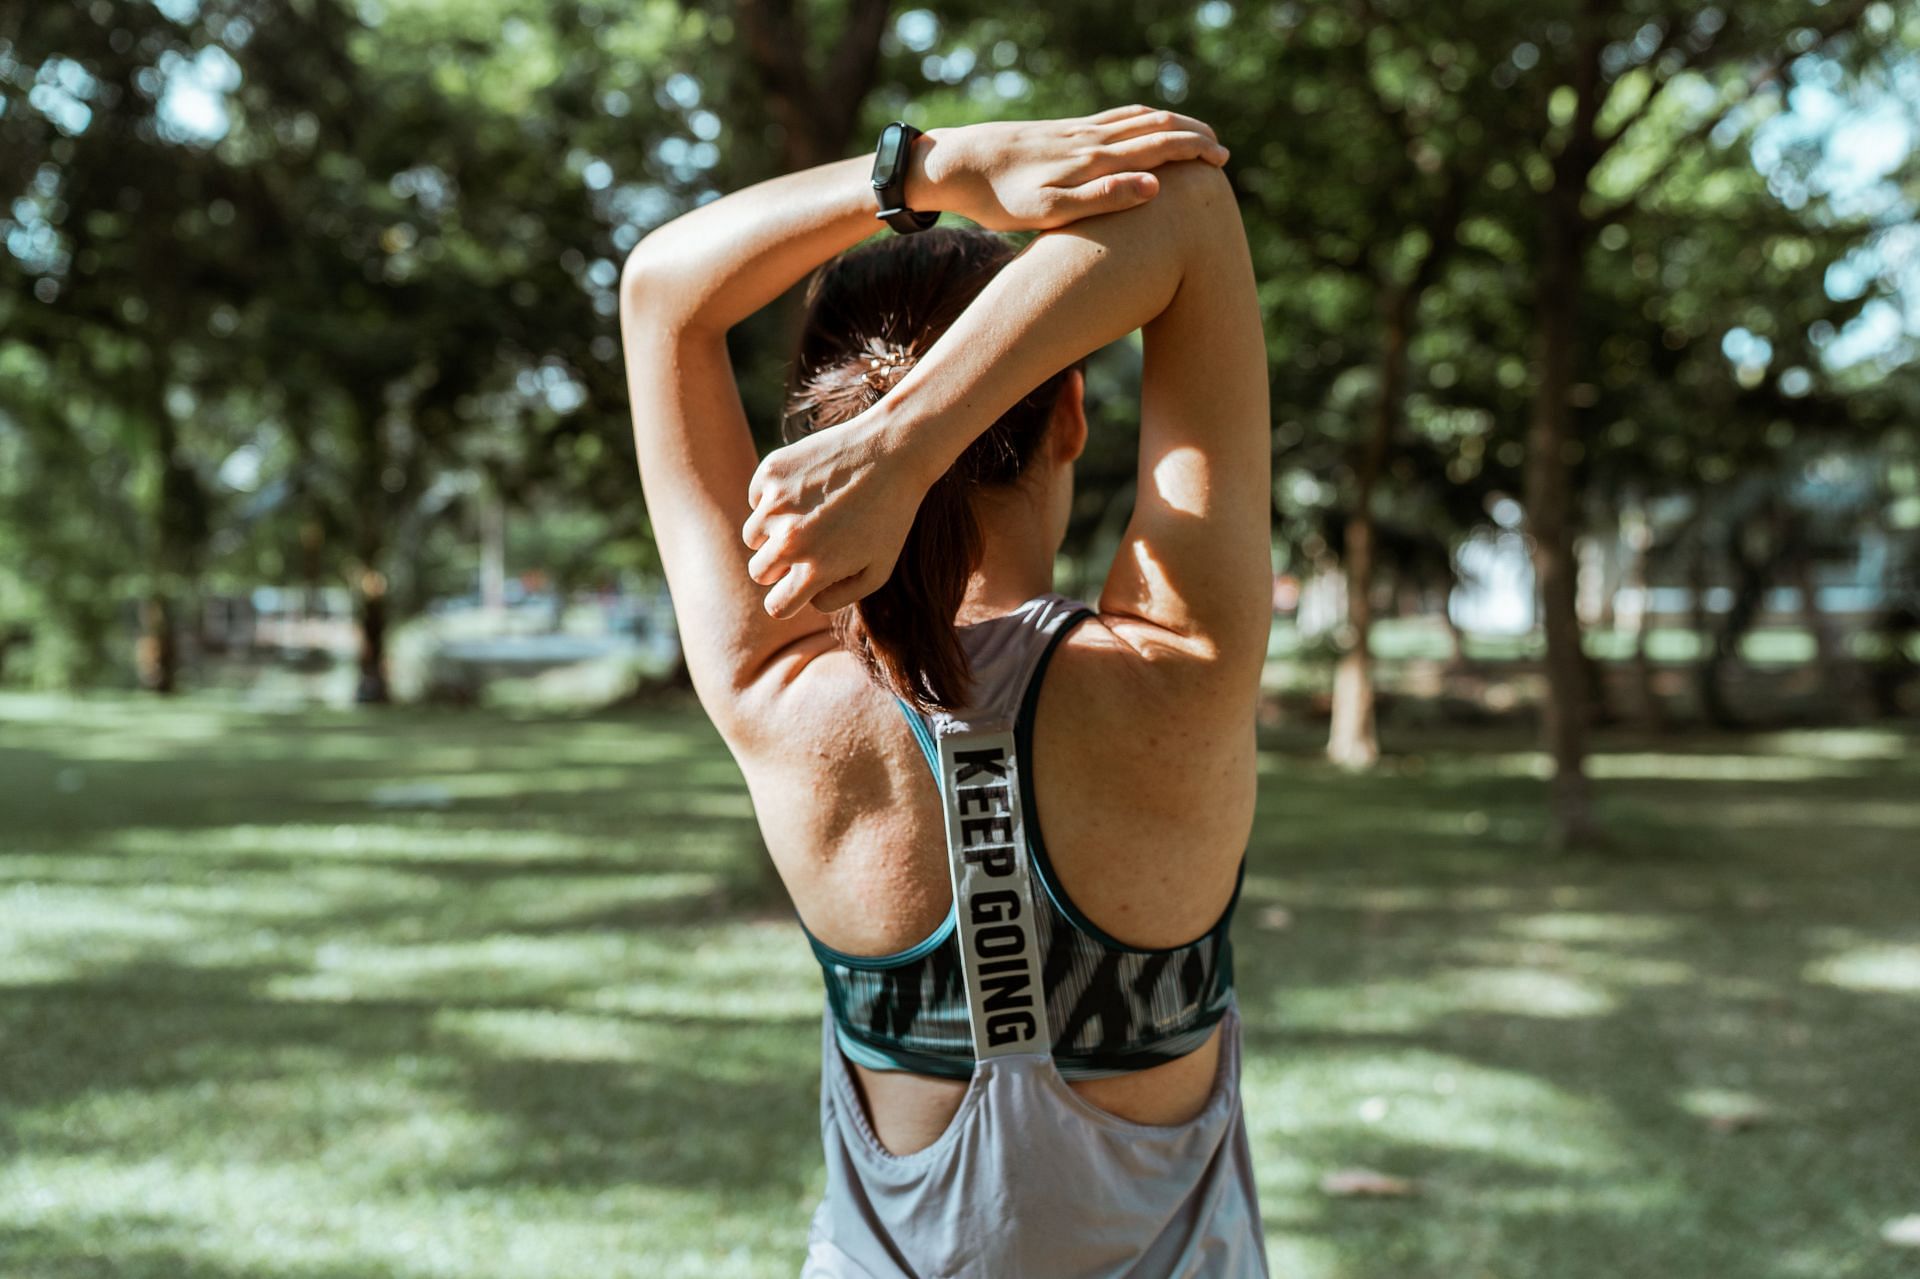 Arm exercises are important to maintain overall upper body strength (Image via Pexels @Ketut Subiyanto)